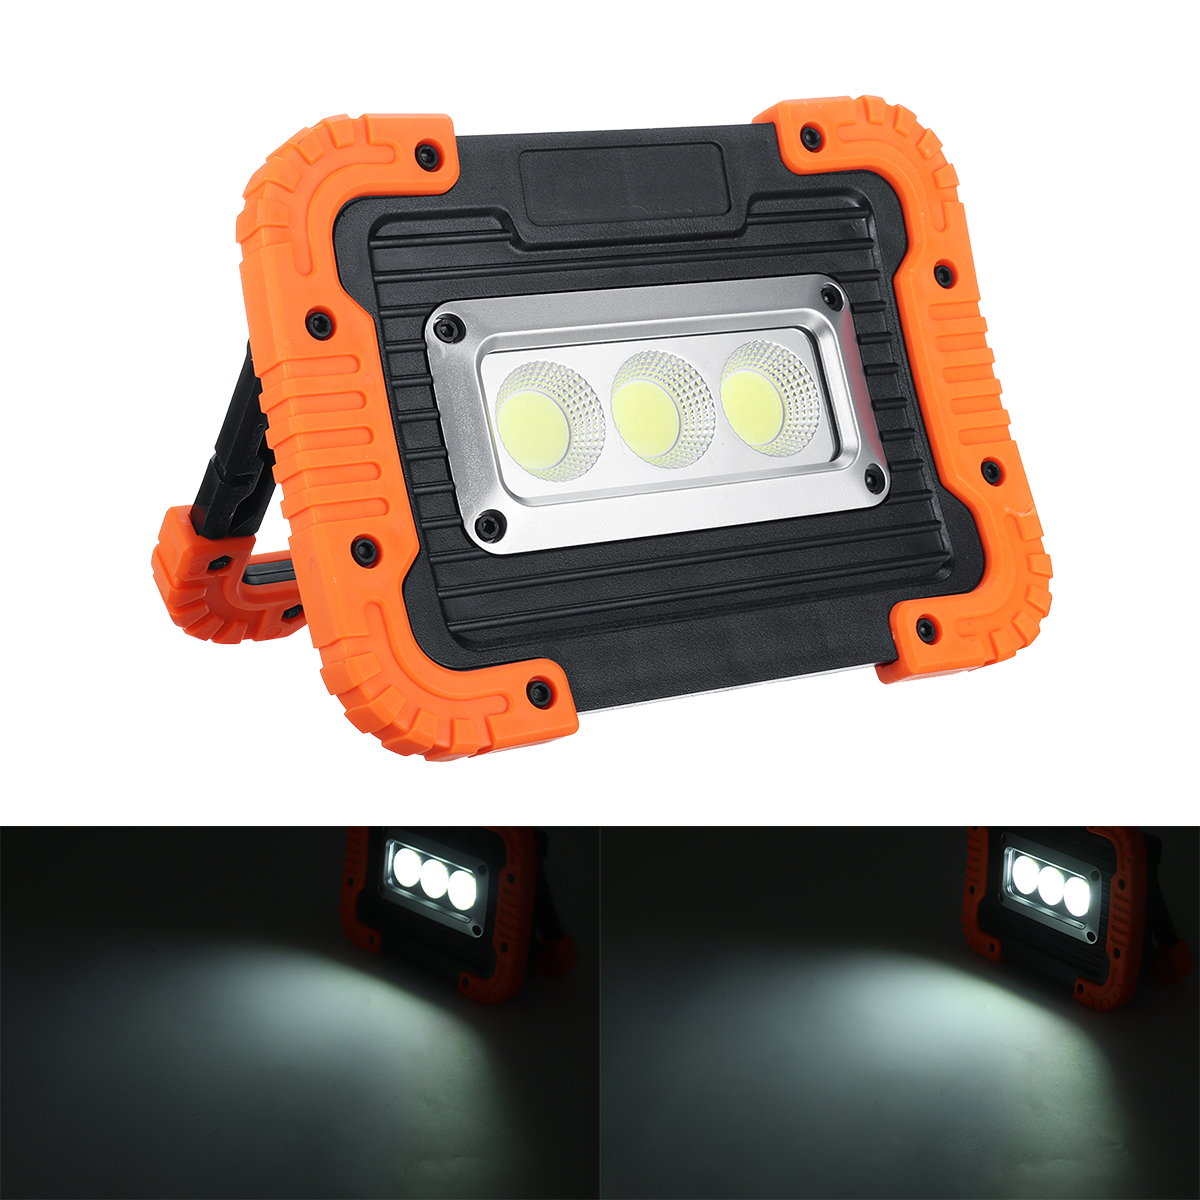 10W COB LED Floodlight Outdoor Camping Work Lamp Rechargeable Charging Light - Auto GoShop